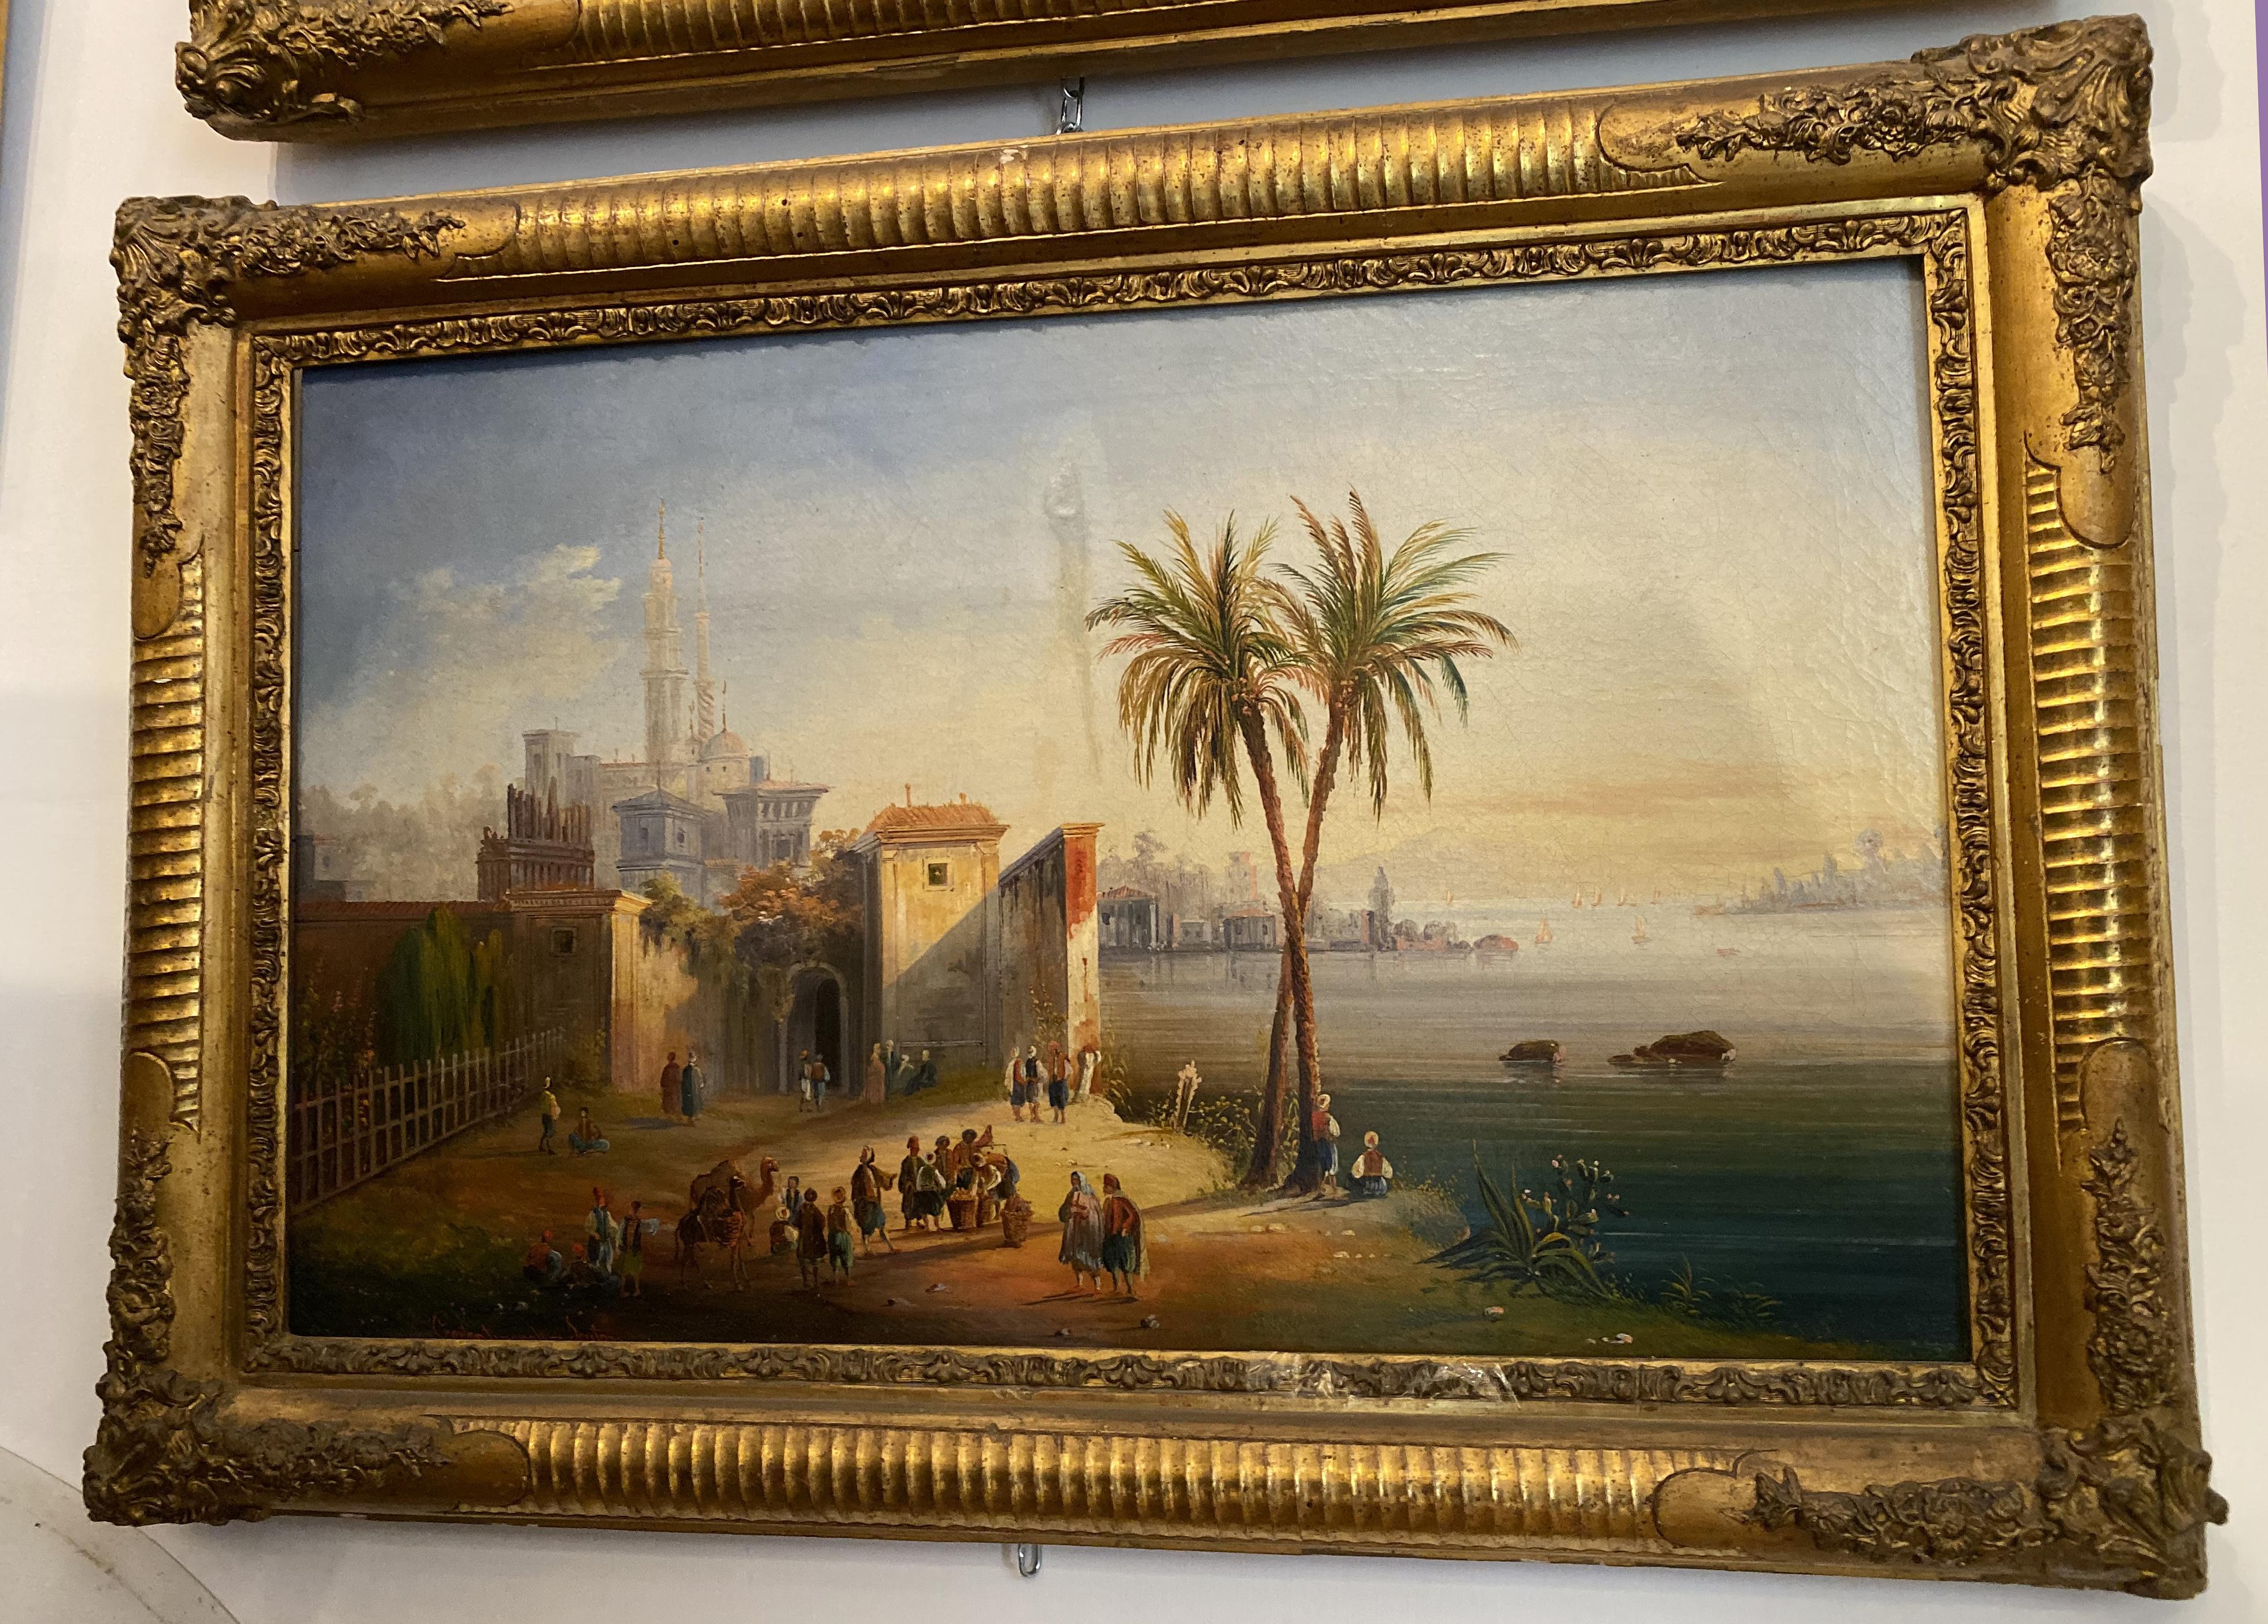 Exceptional Pair of Turkish Landscape Paintings signed Costantinopoli Scutari 4